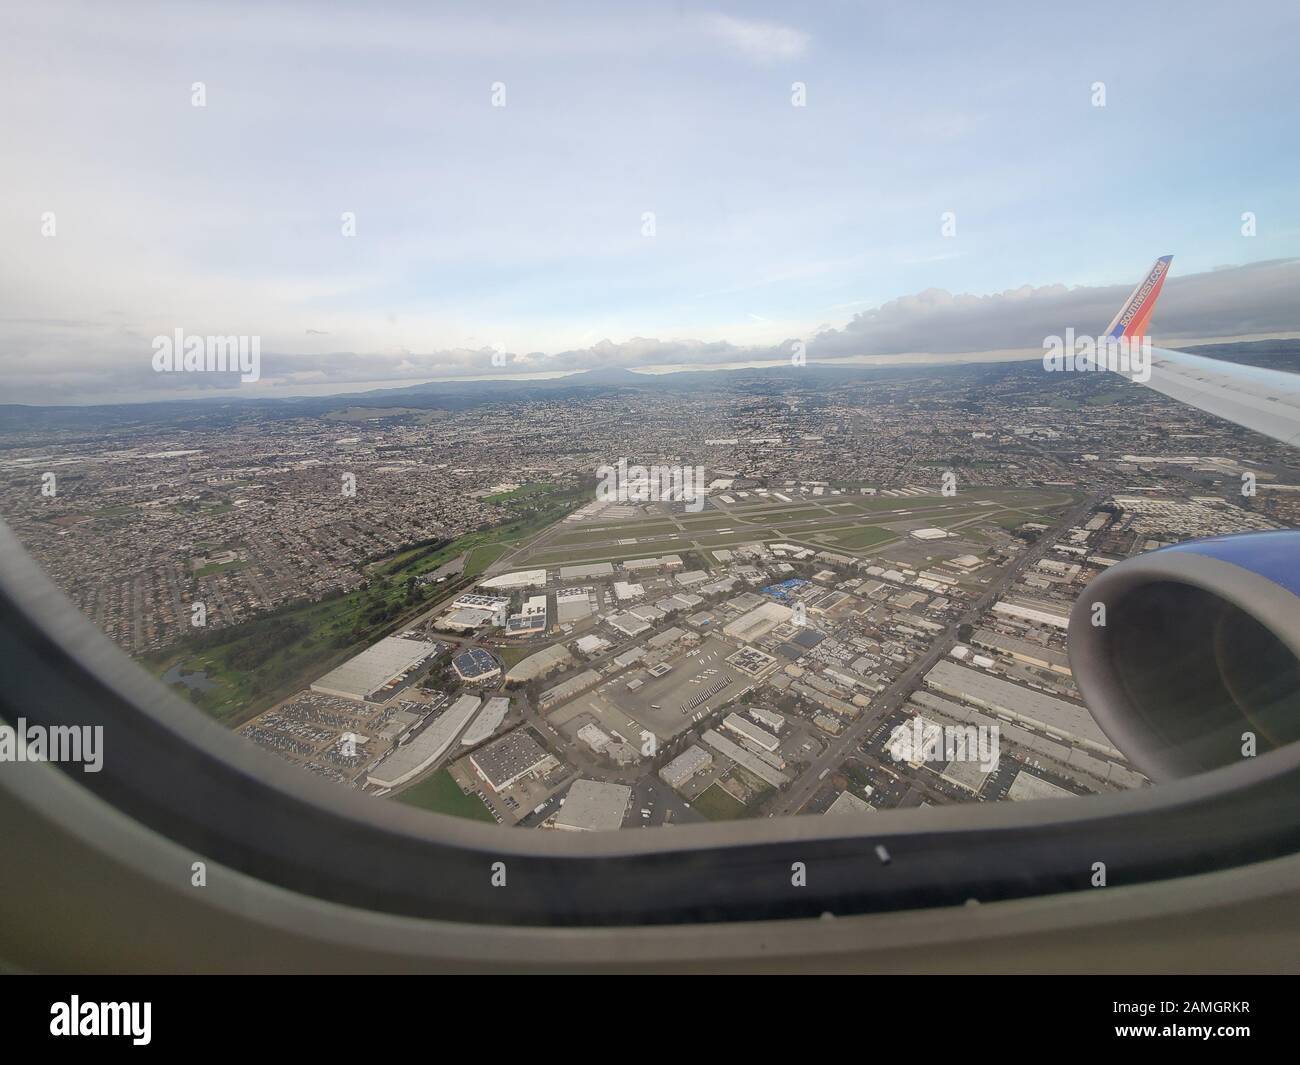 Wide angle view out window of Southwest Airlines aircraft, with wingtip visible, flying over Oakland, California, January 8, 2020. () Stock Photo